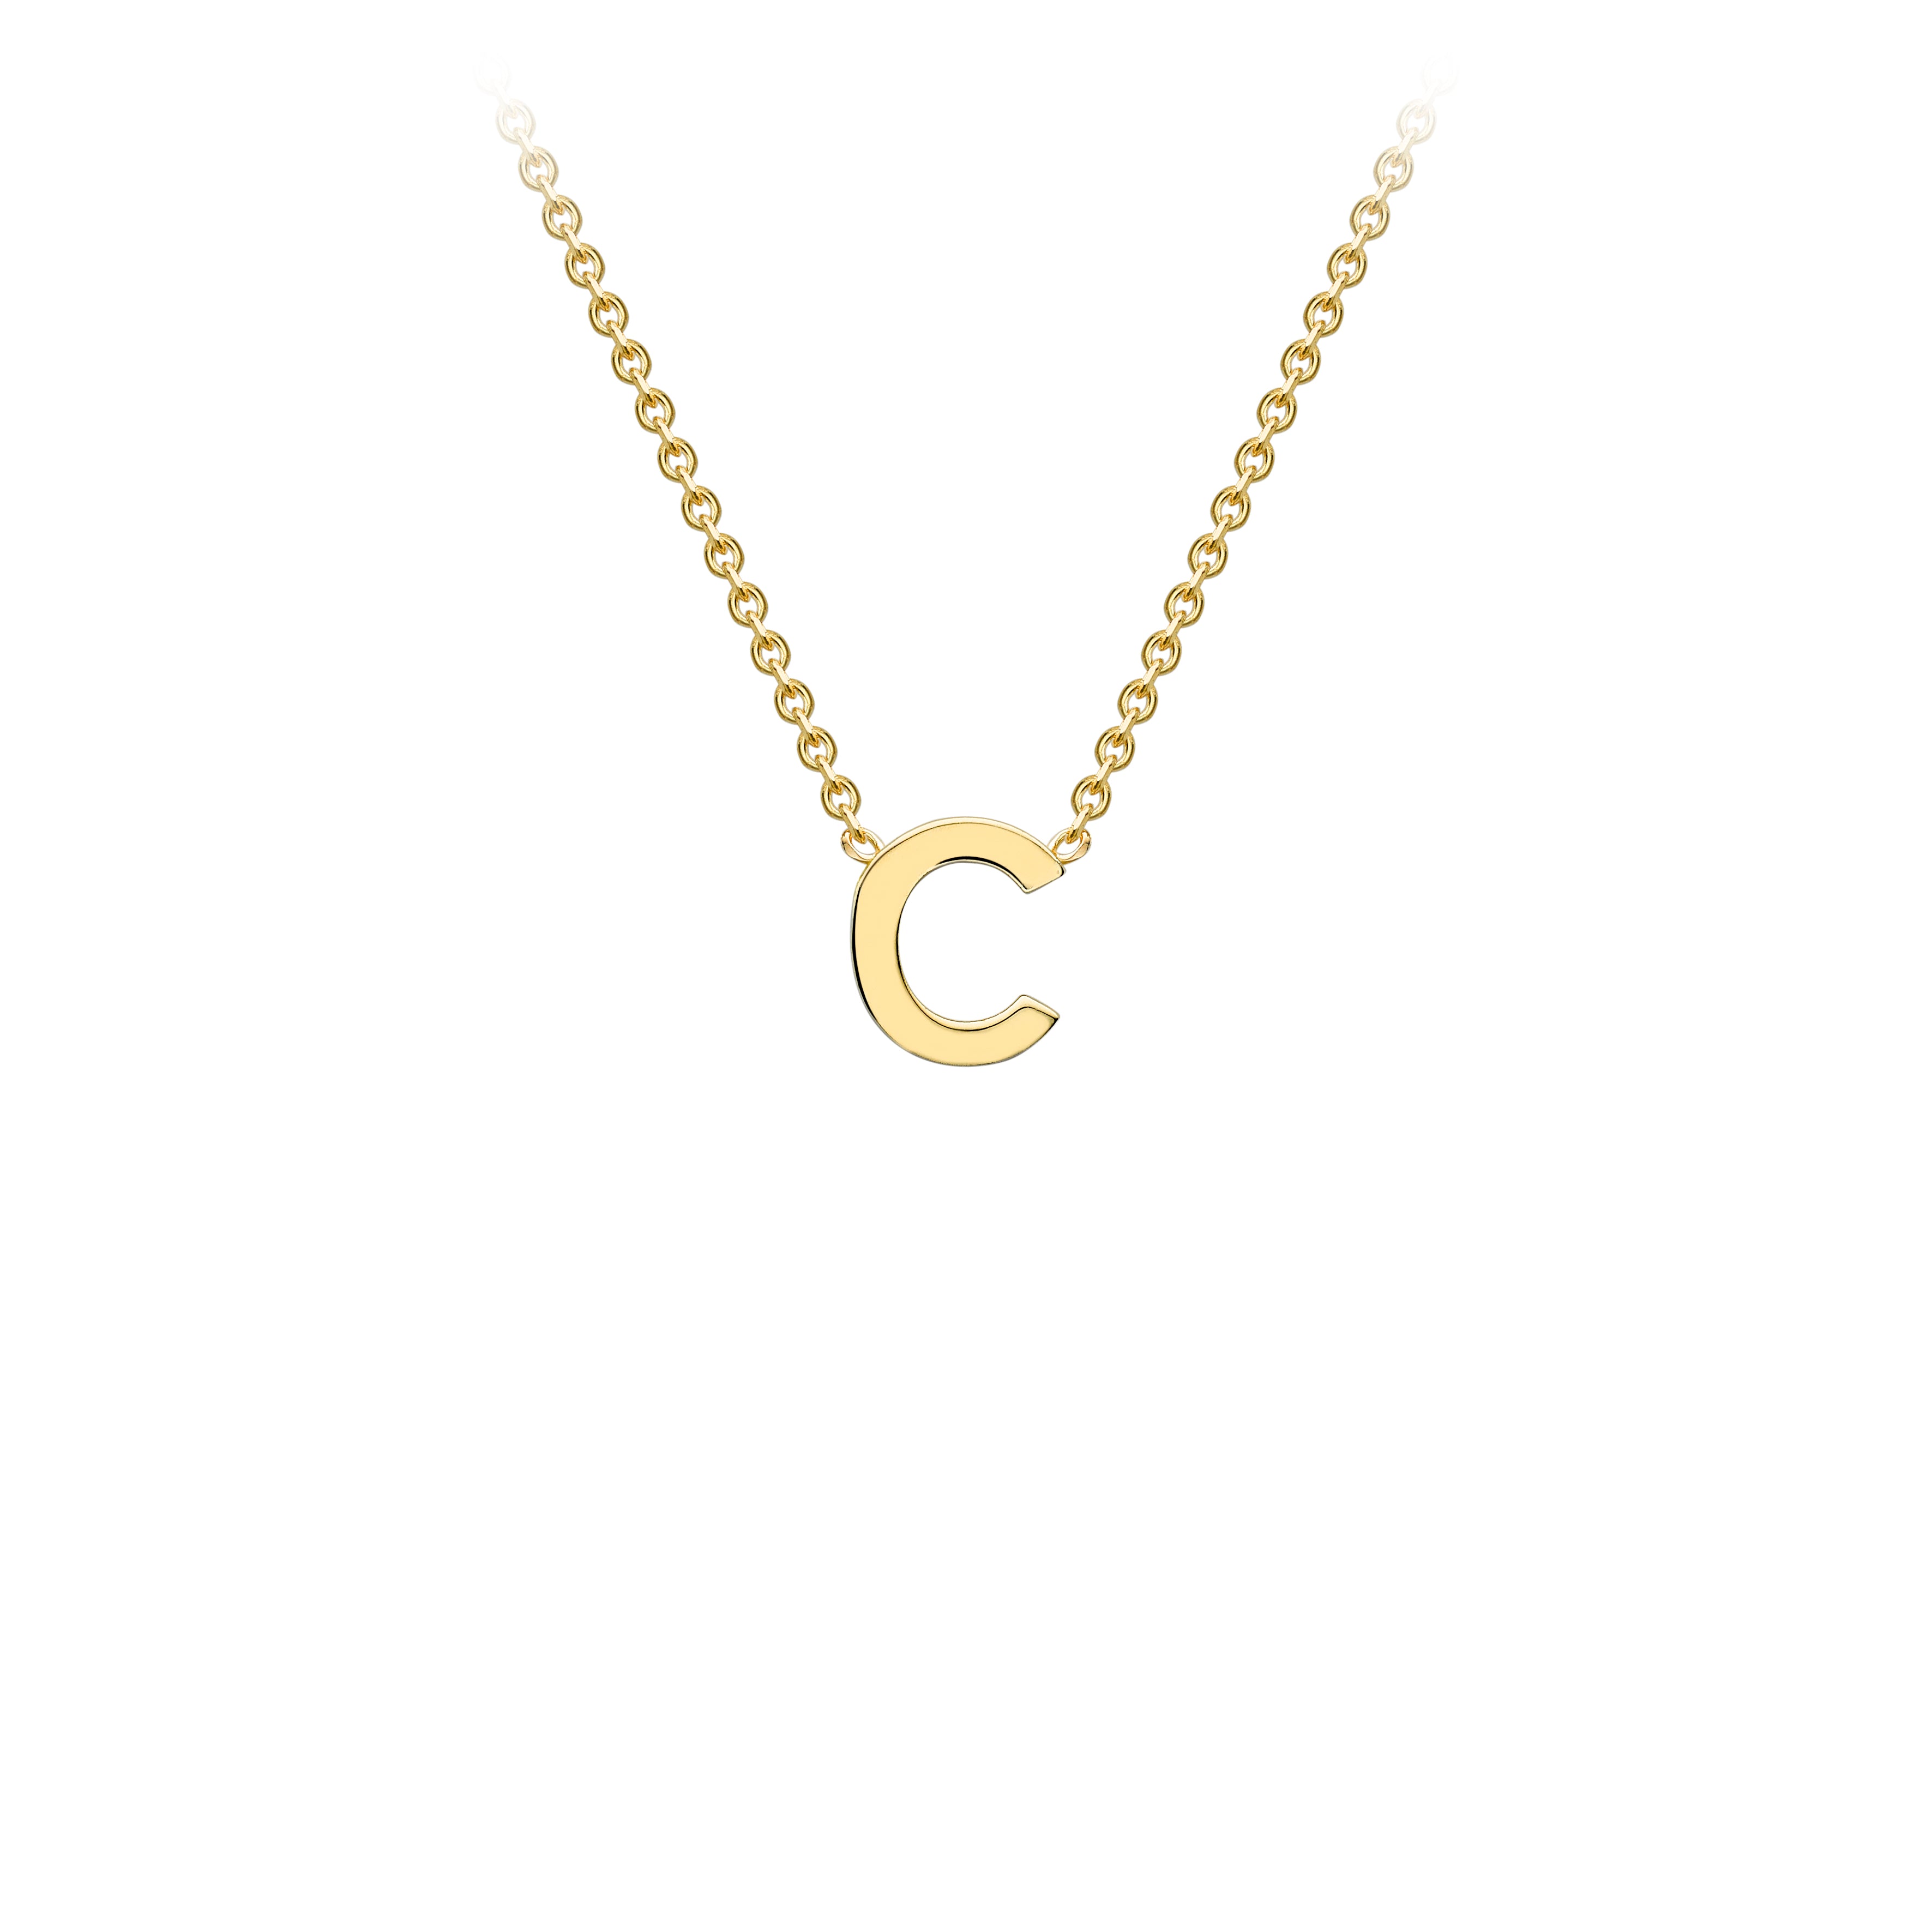 9ct Yellow Gold Petite Initial "C" Necklace